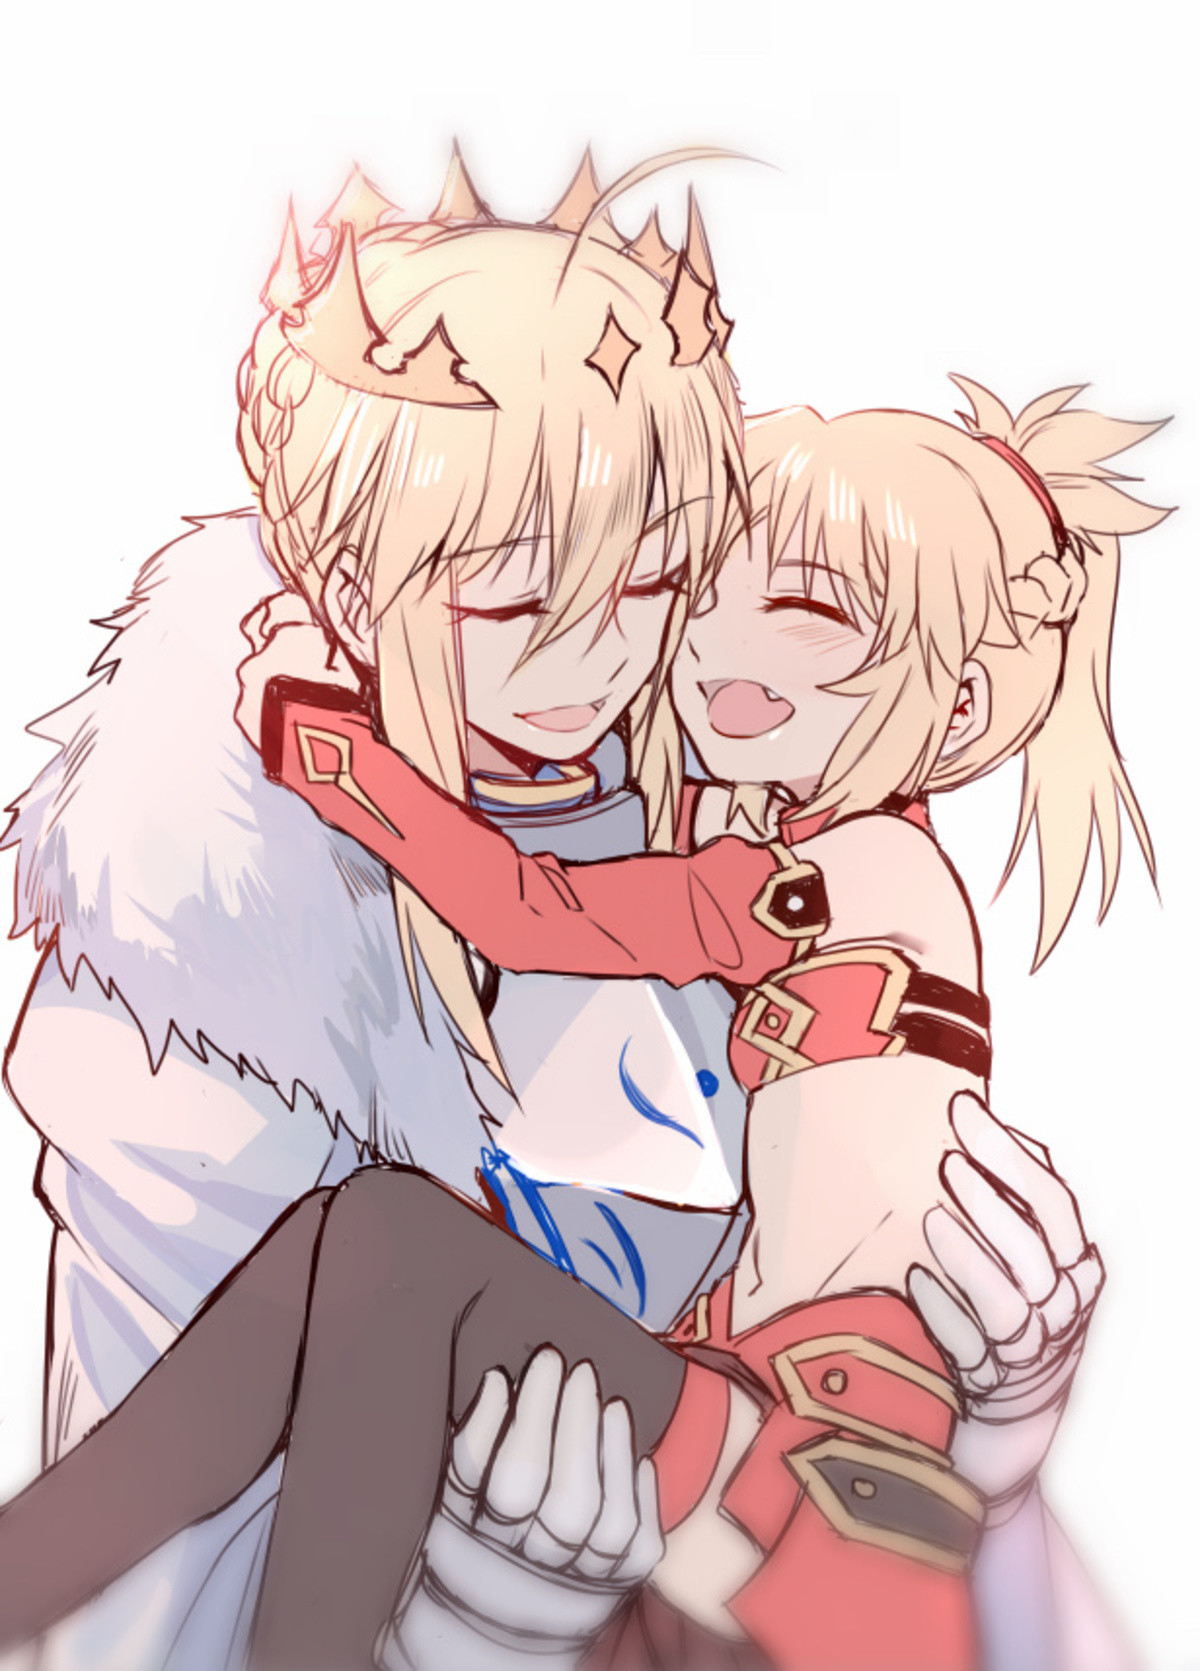 Mordred and Arthur (Cuteness Overload). .. Actual Arthur always seem to be kinder to Mordred than Arturia, is there any reason why that is?